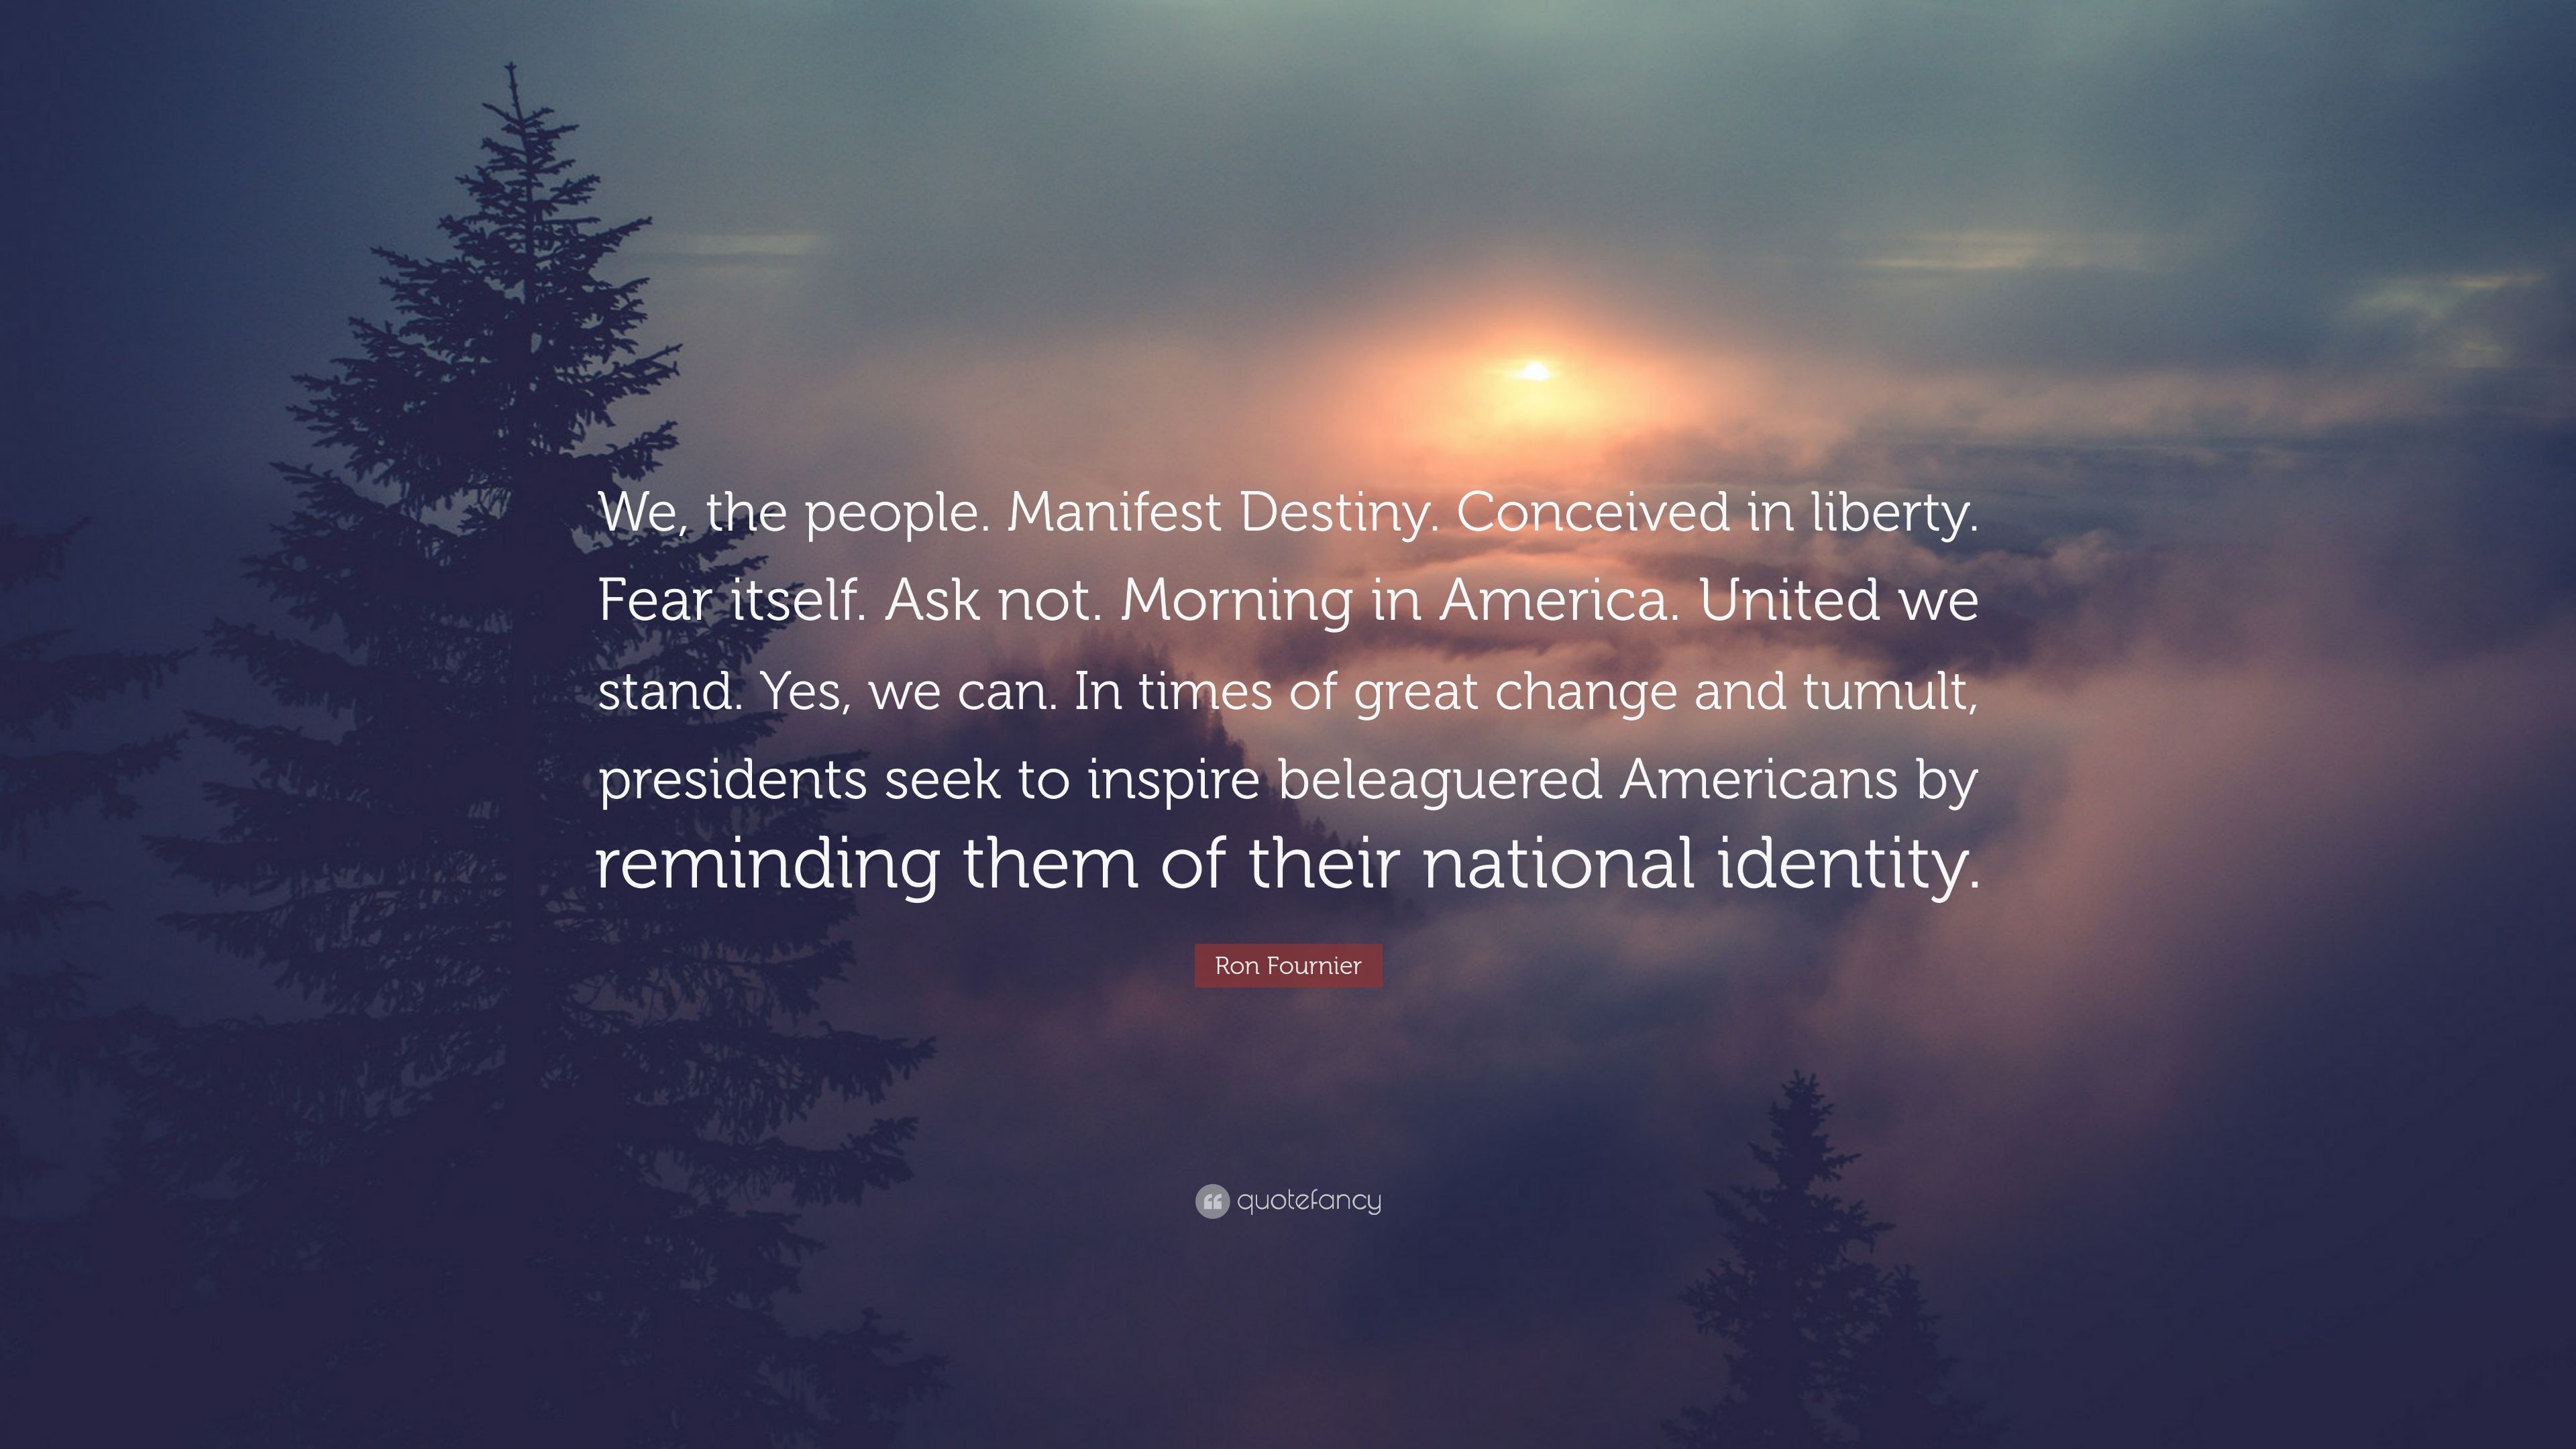 Ron Fournier Quote: “We, the people. Manifest Destiny. Conceived